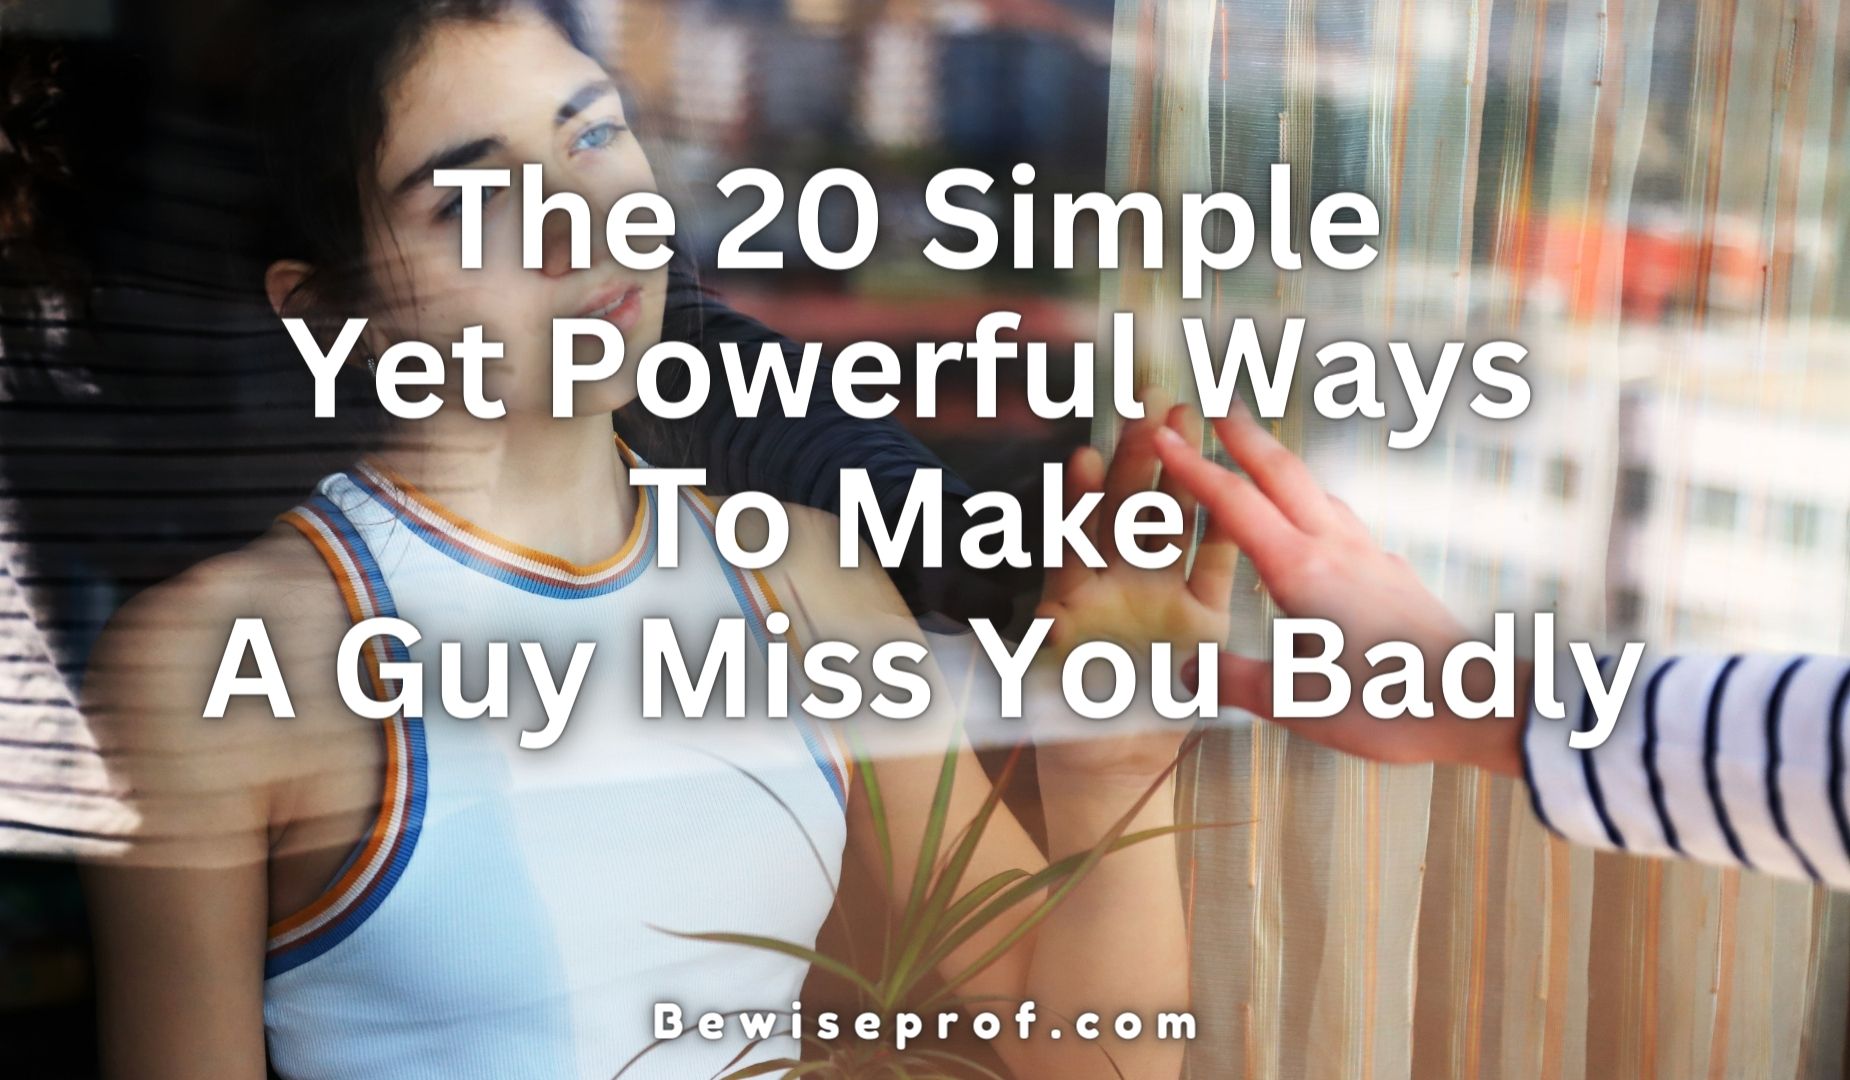 The 20 Simple Yet Powerful Ways To Make A Guy Miss You Badly